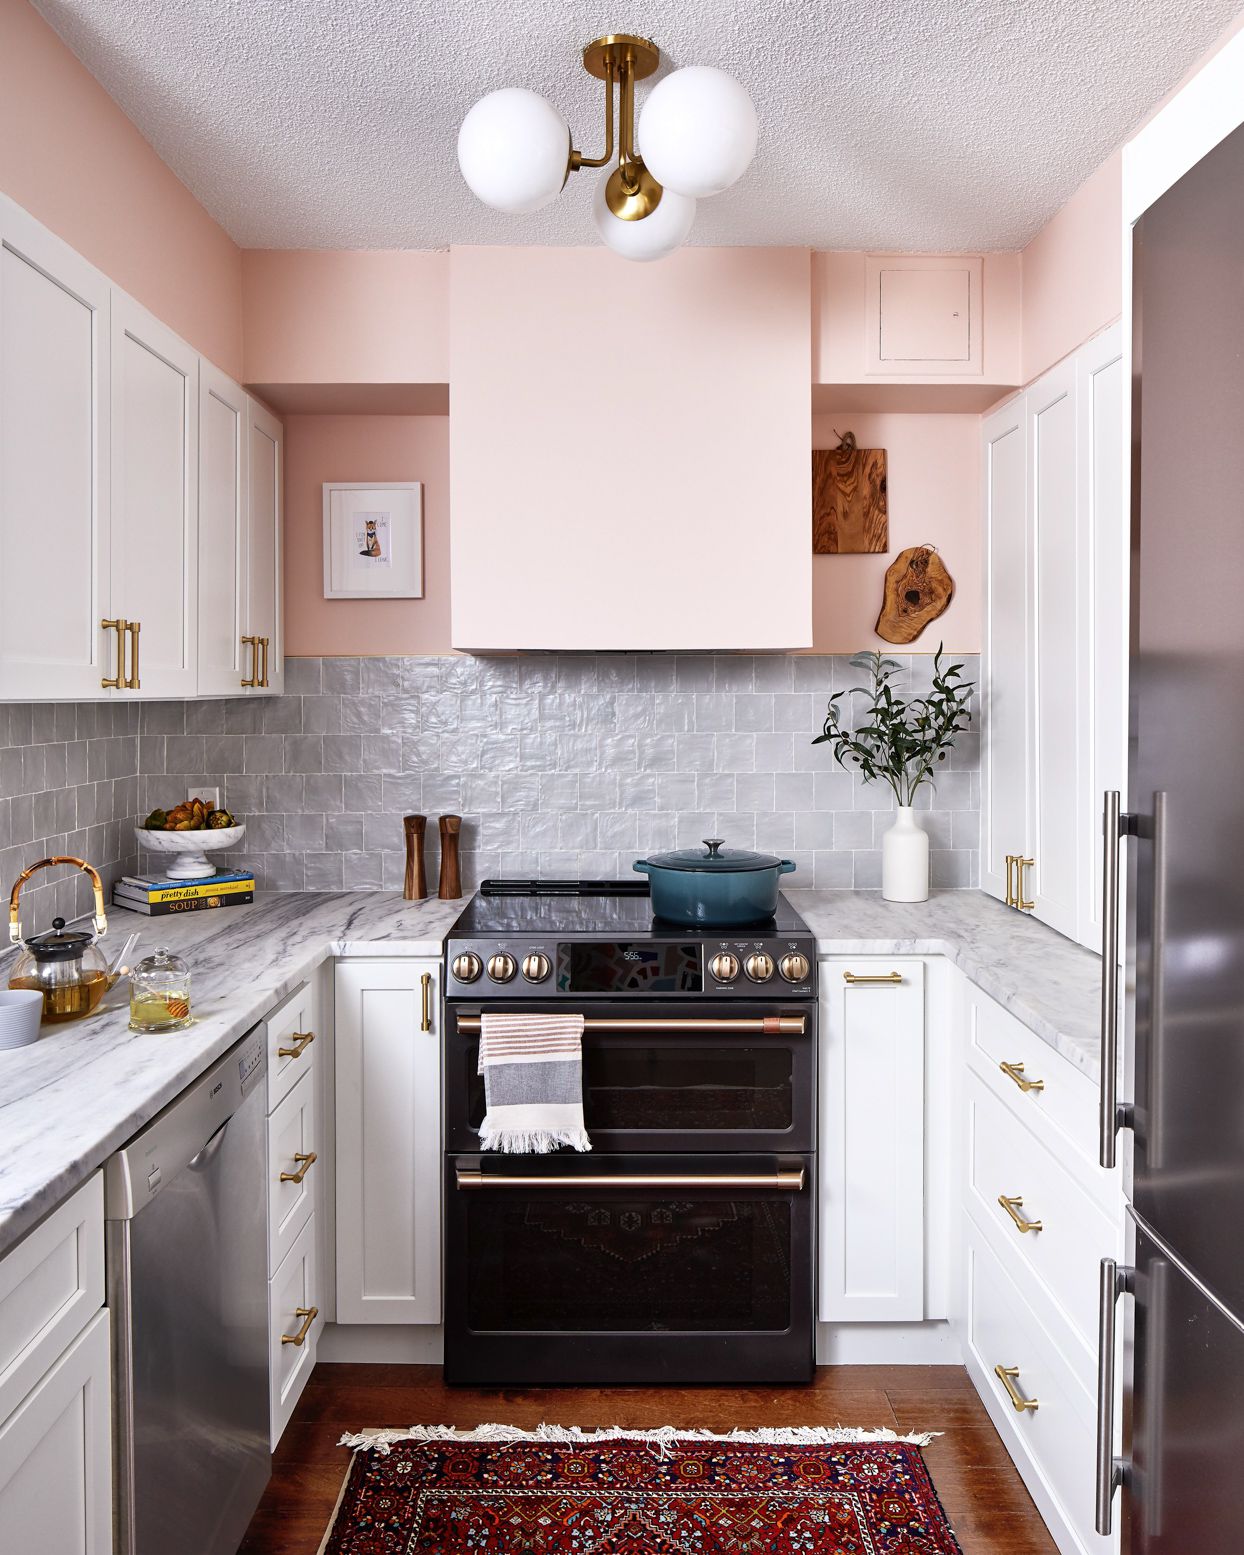 Galley kitchen ideas – 12 super-efficient layouts that maximize every inch of space